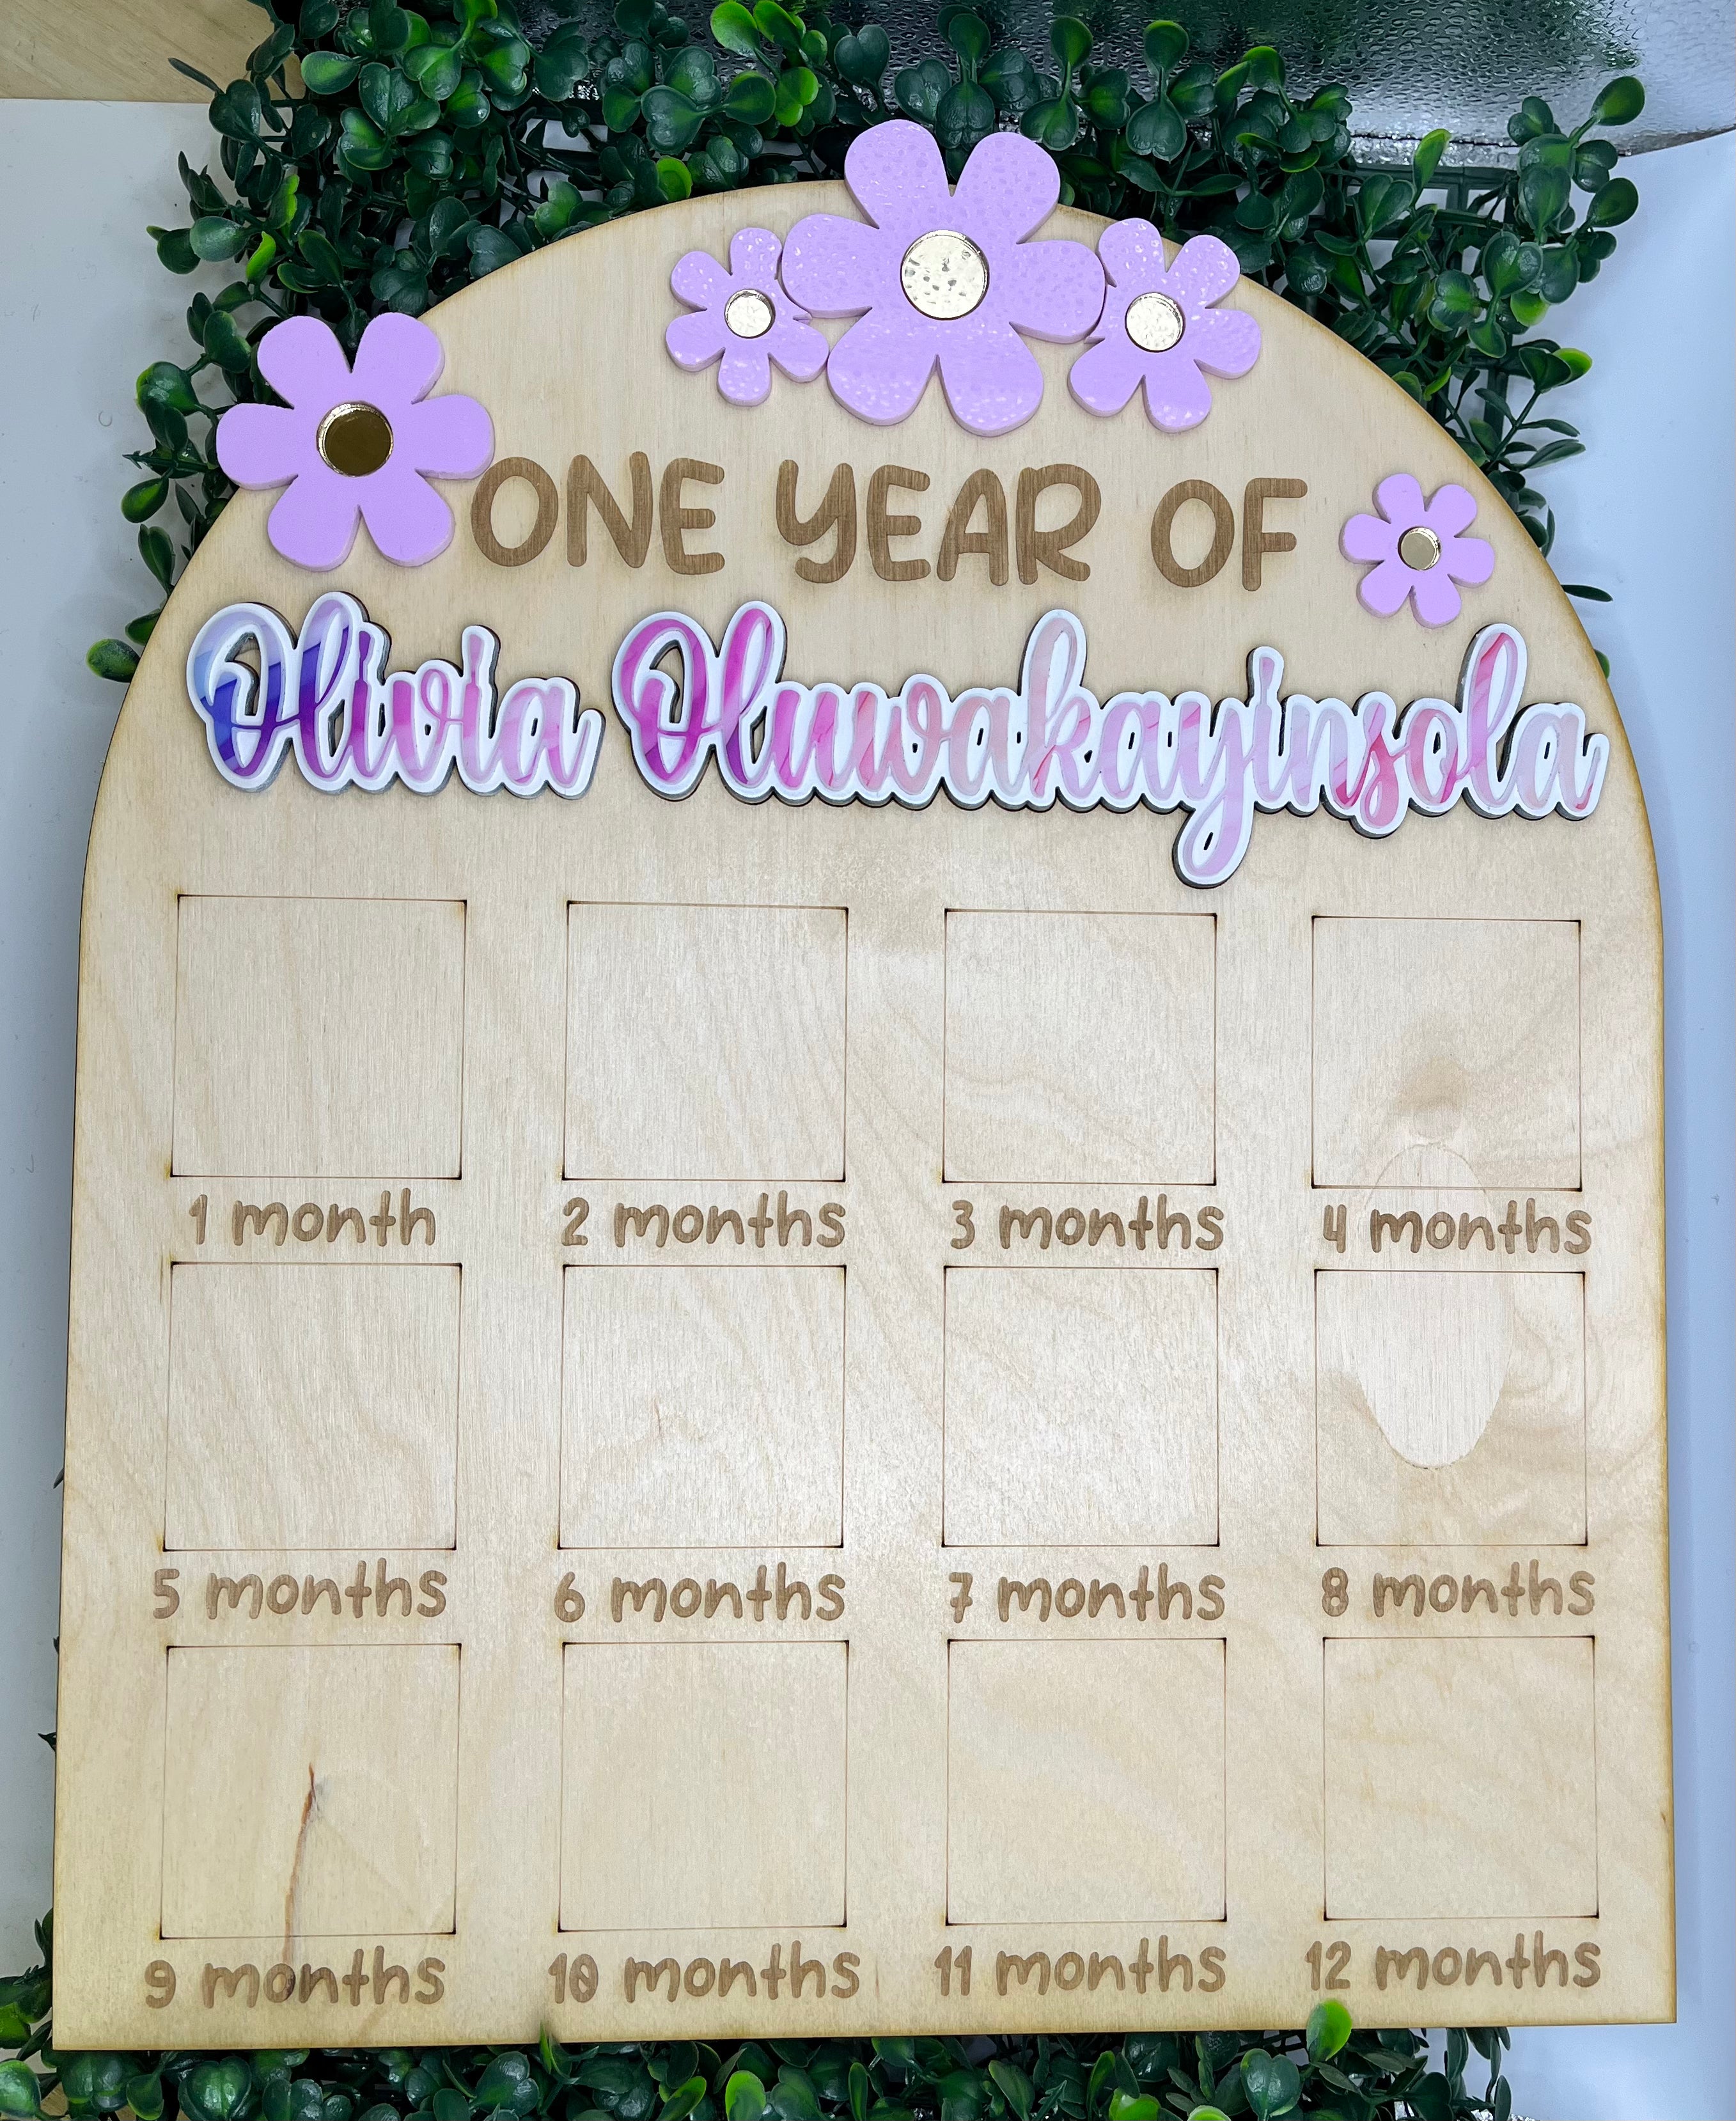 'One Year of' Photo board